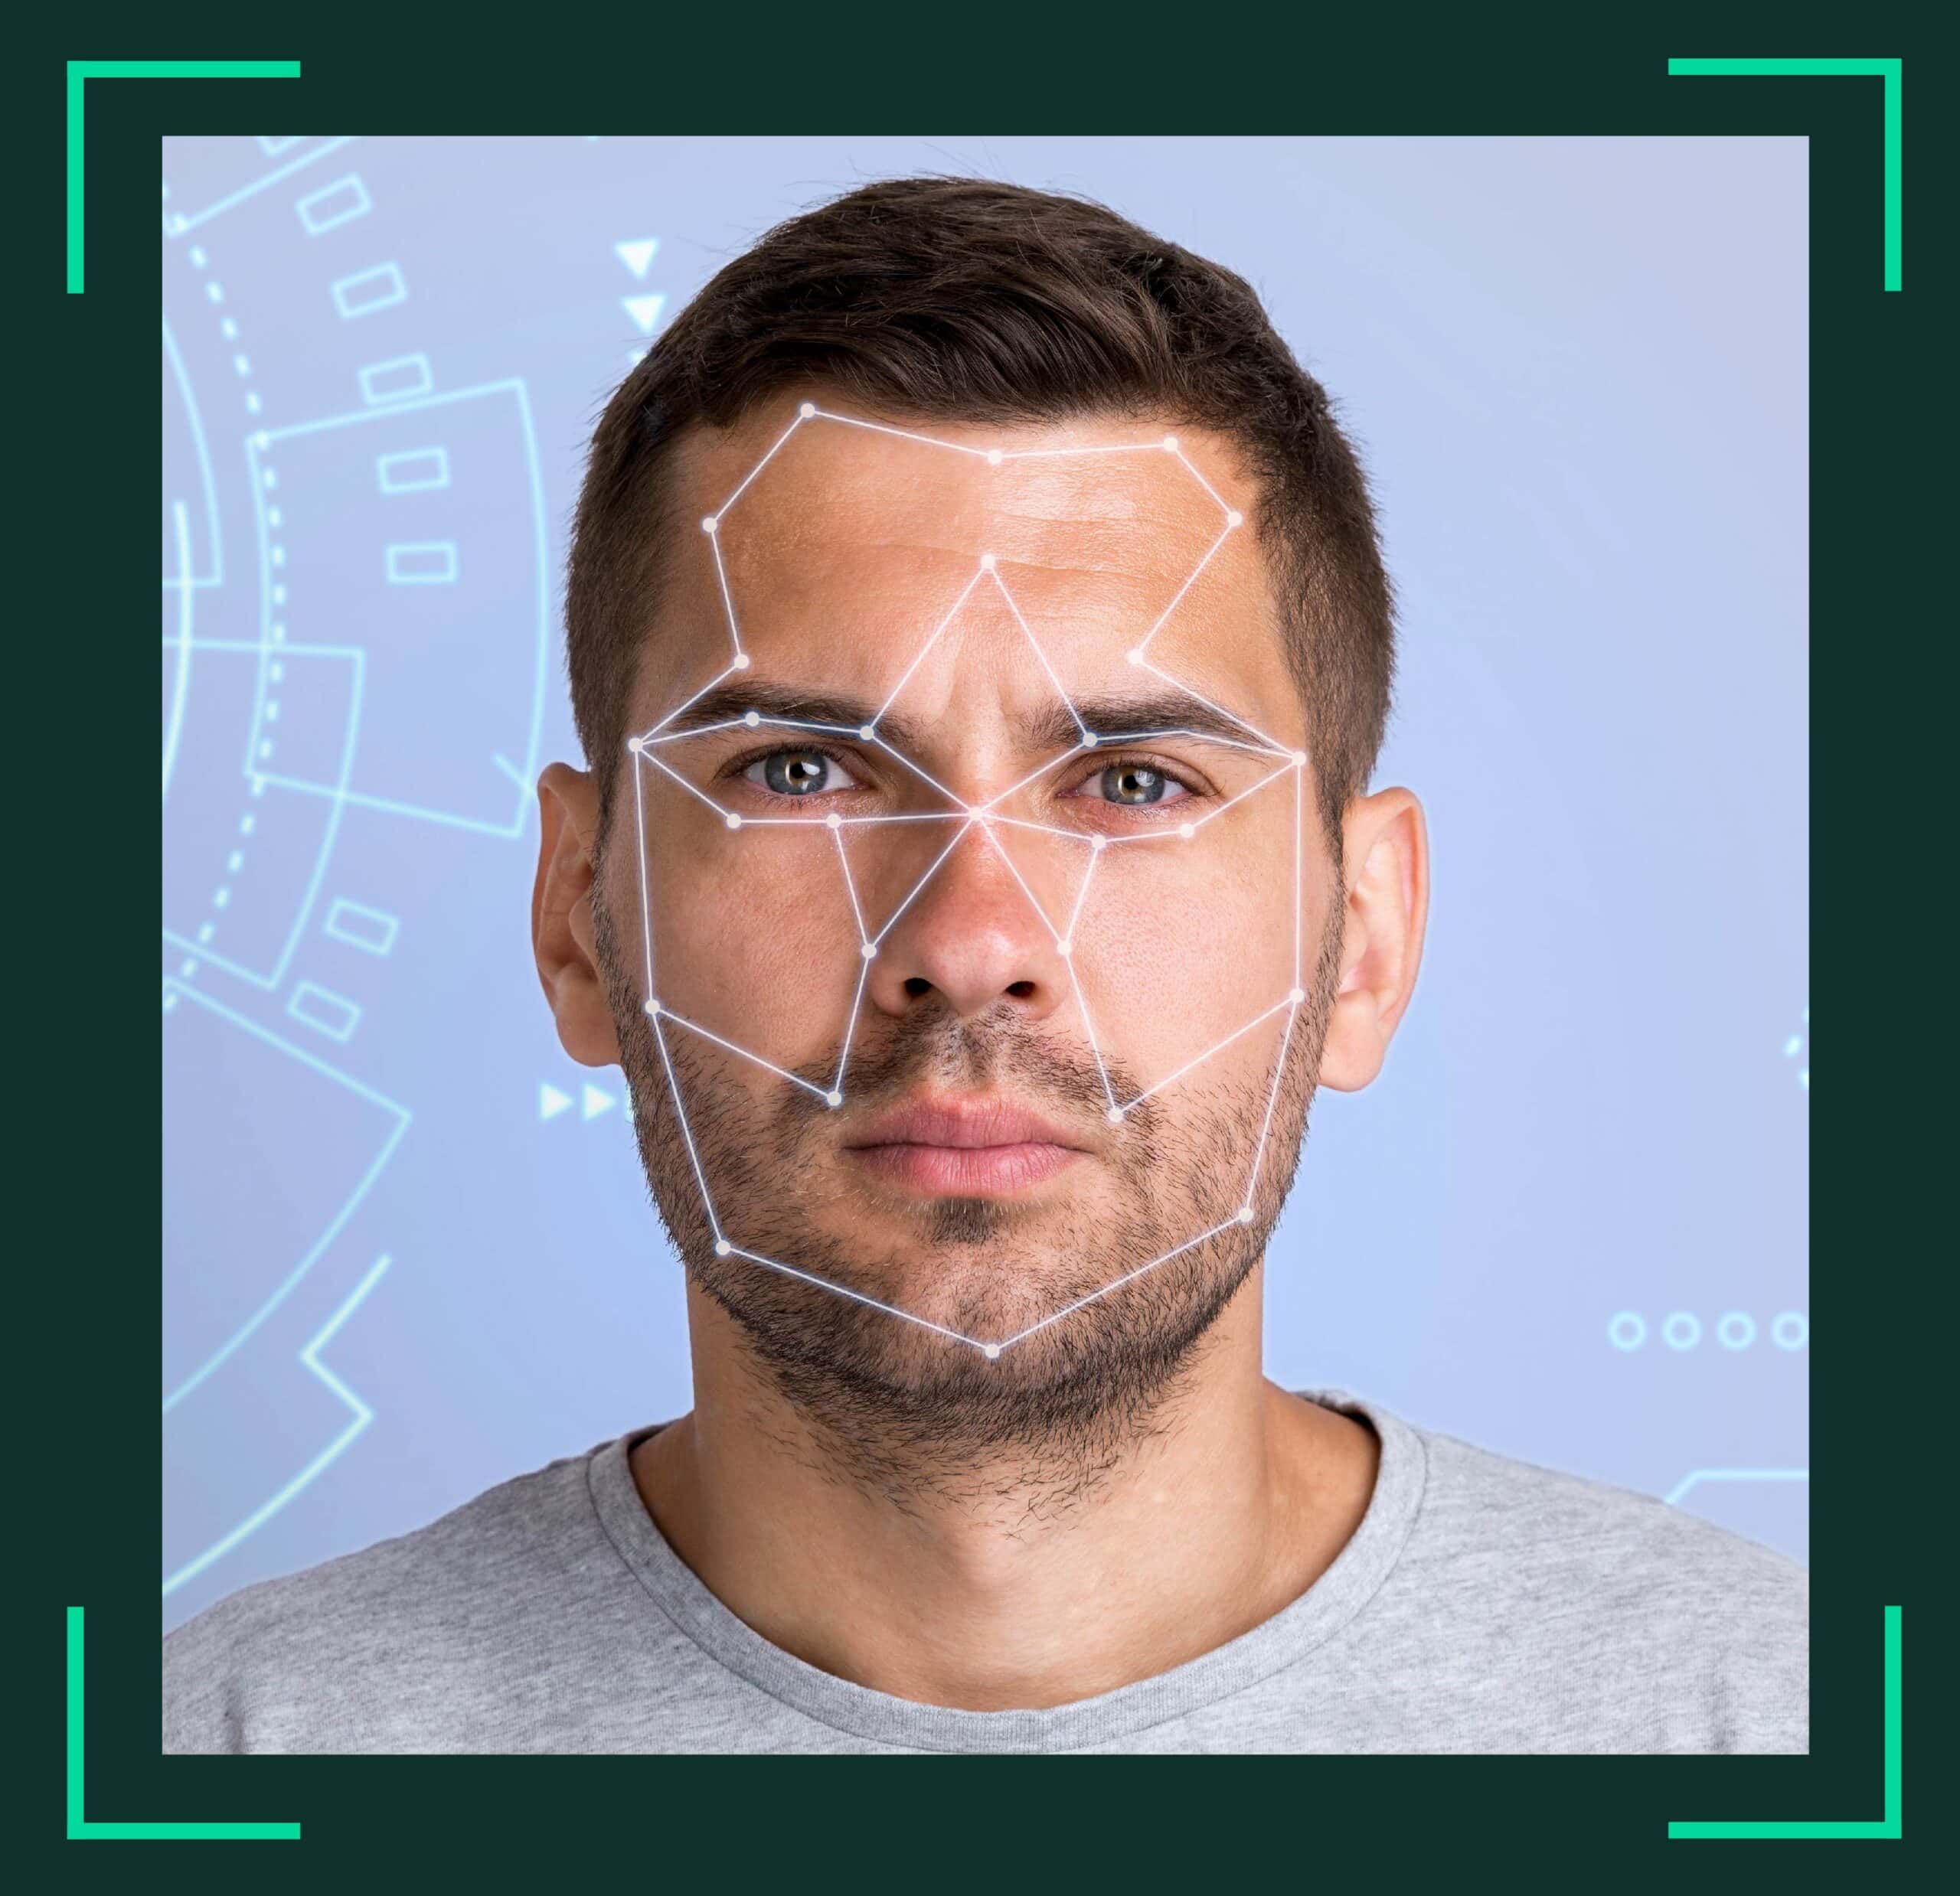 Integration of Artificial Intelligence in Facial Recognition